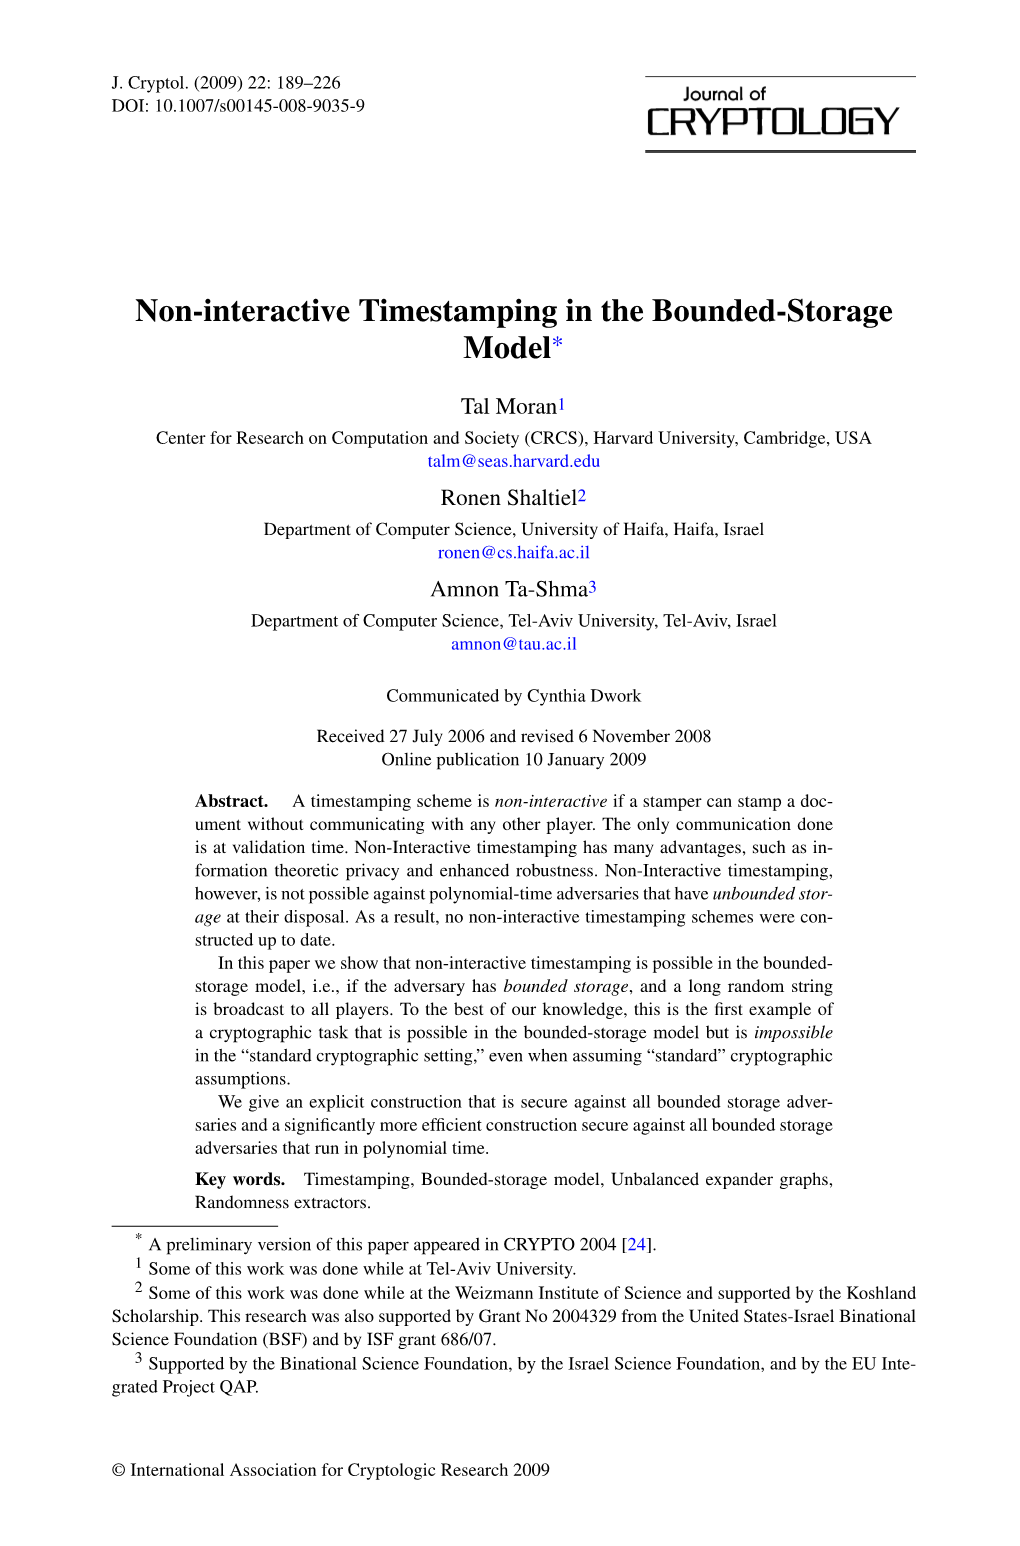 Non-Interactive Timestamping in the Bounded-Storage Model*